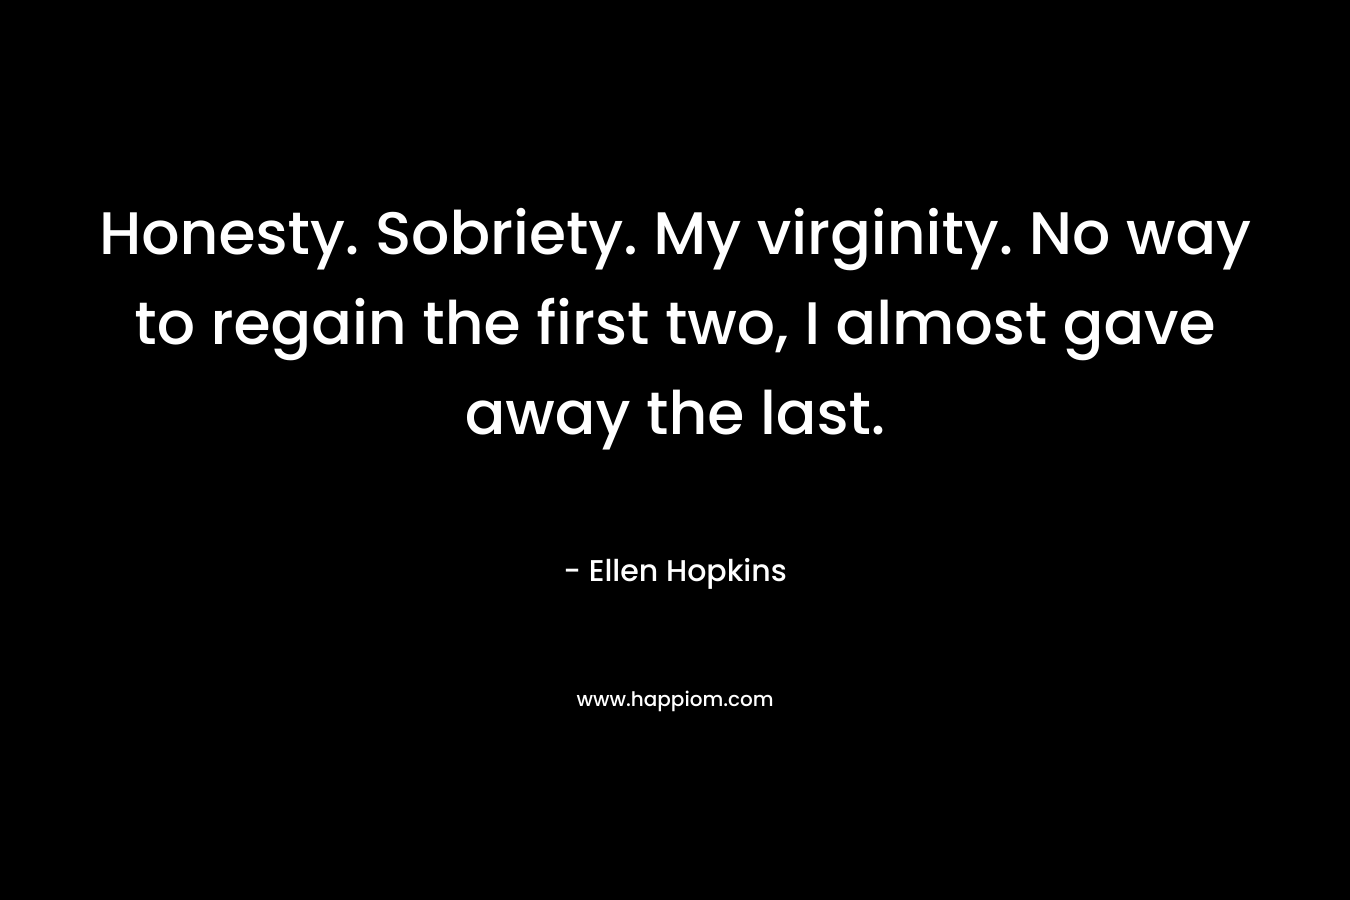 Honesty. Sobriety. My virginity. No way to regain  the first two, I almost gave away the last. – Ellen Hopkins